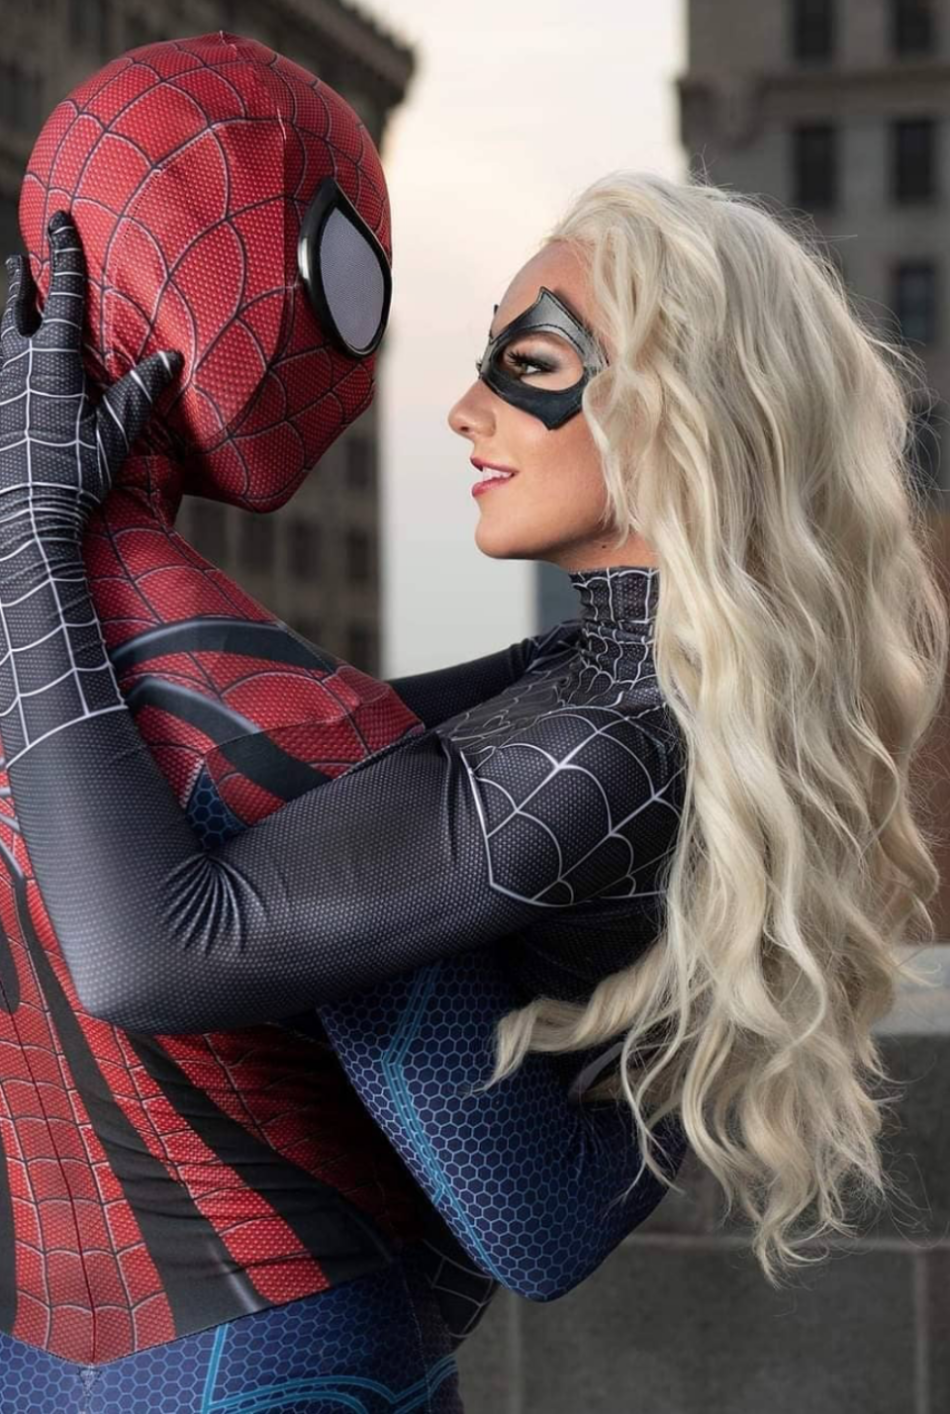 Sexy Red Hot Cosplay Girls Spiderman Women Best Photo Compilation 2021 (89 HQ Photos) 99